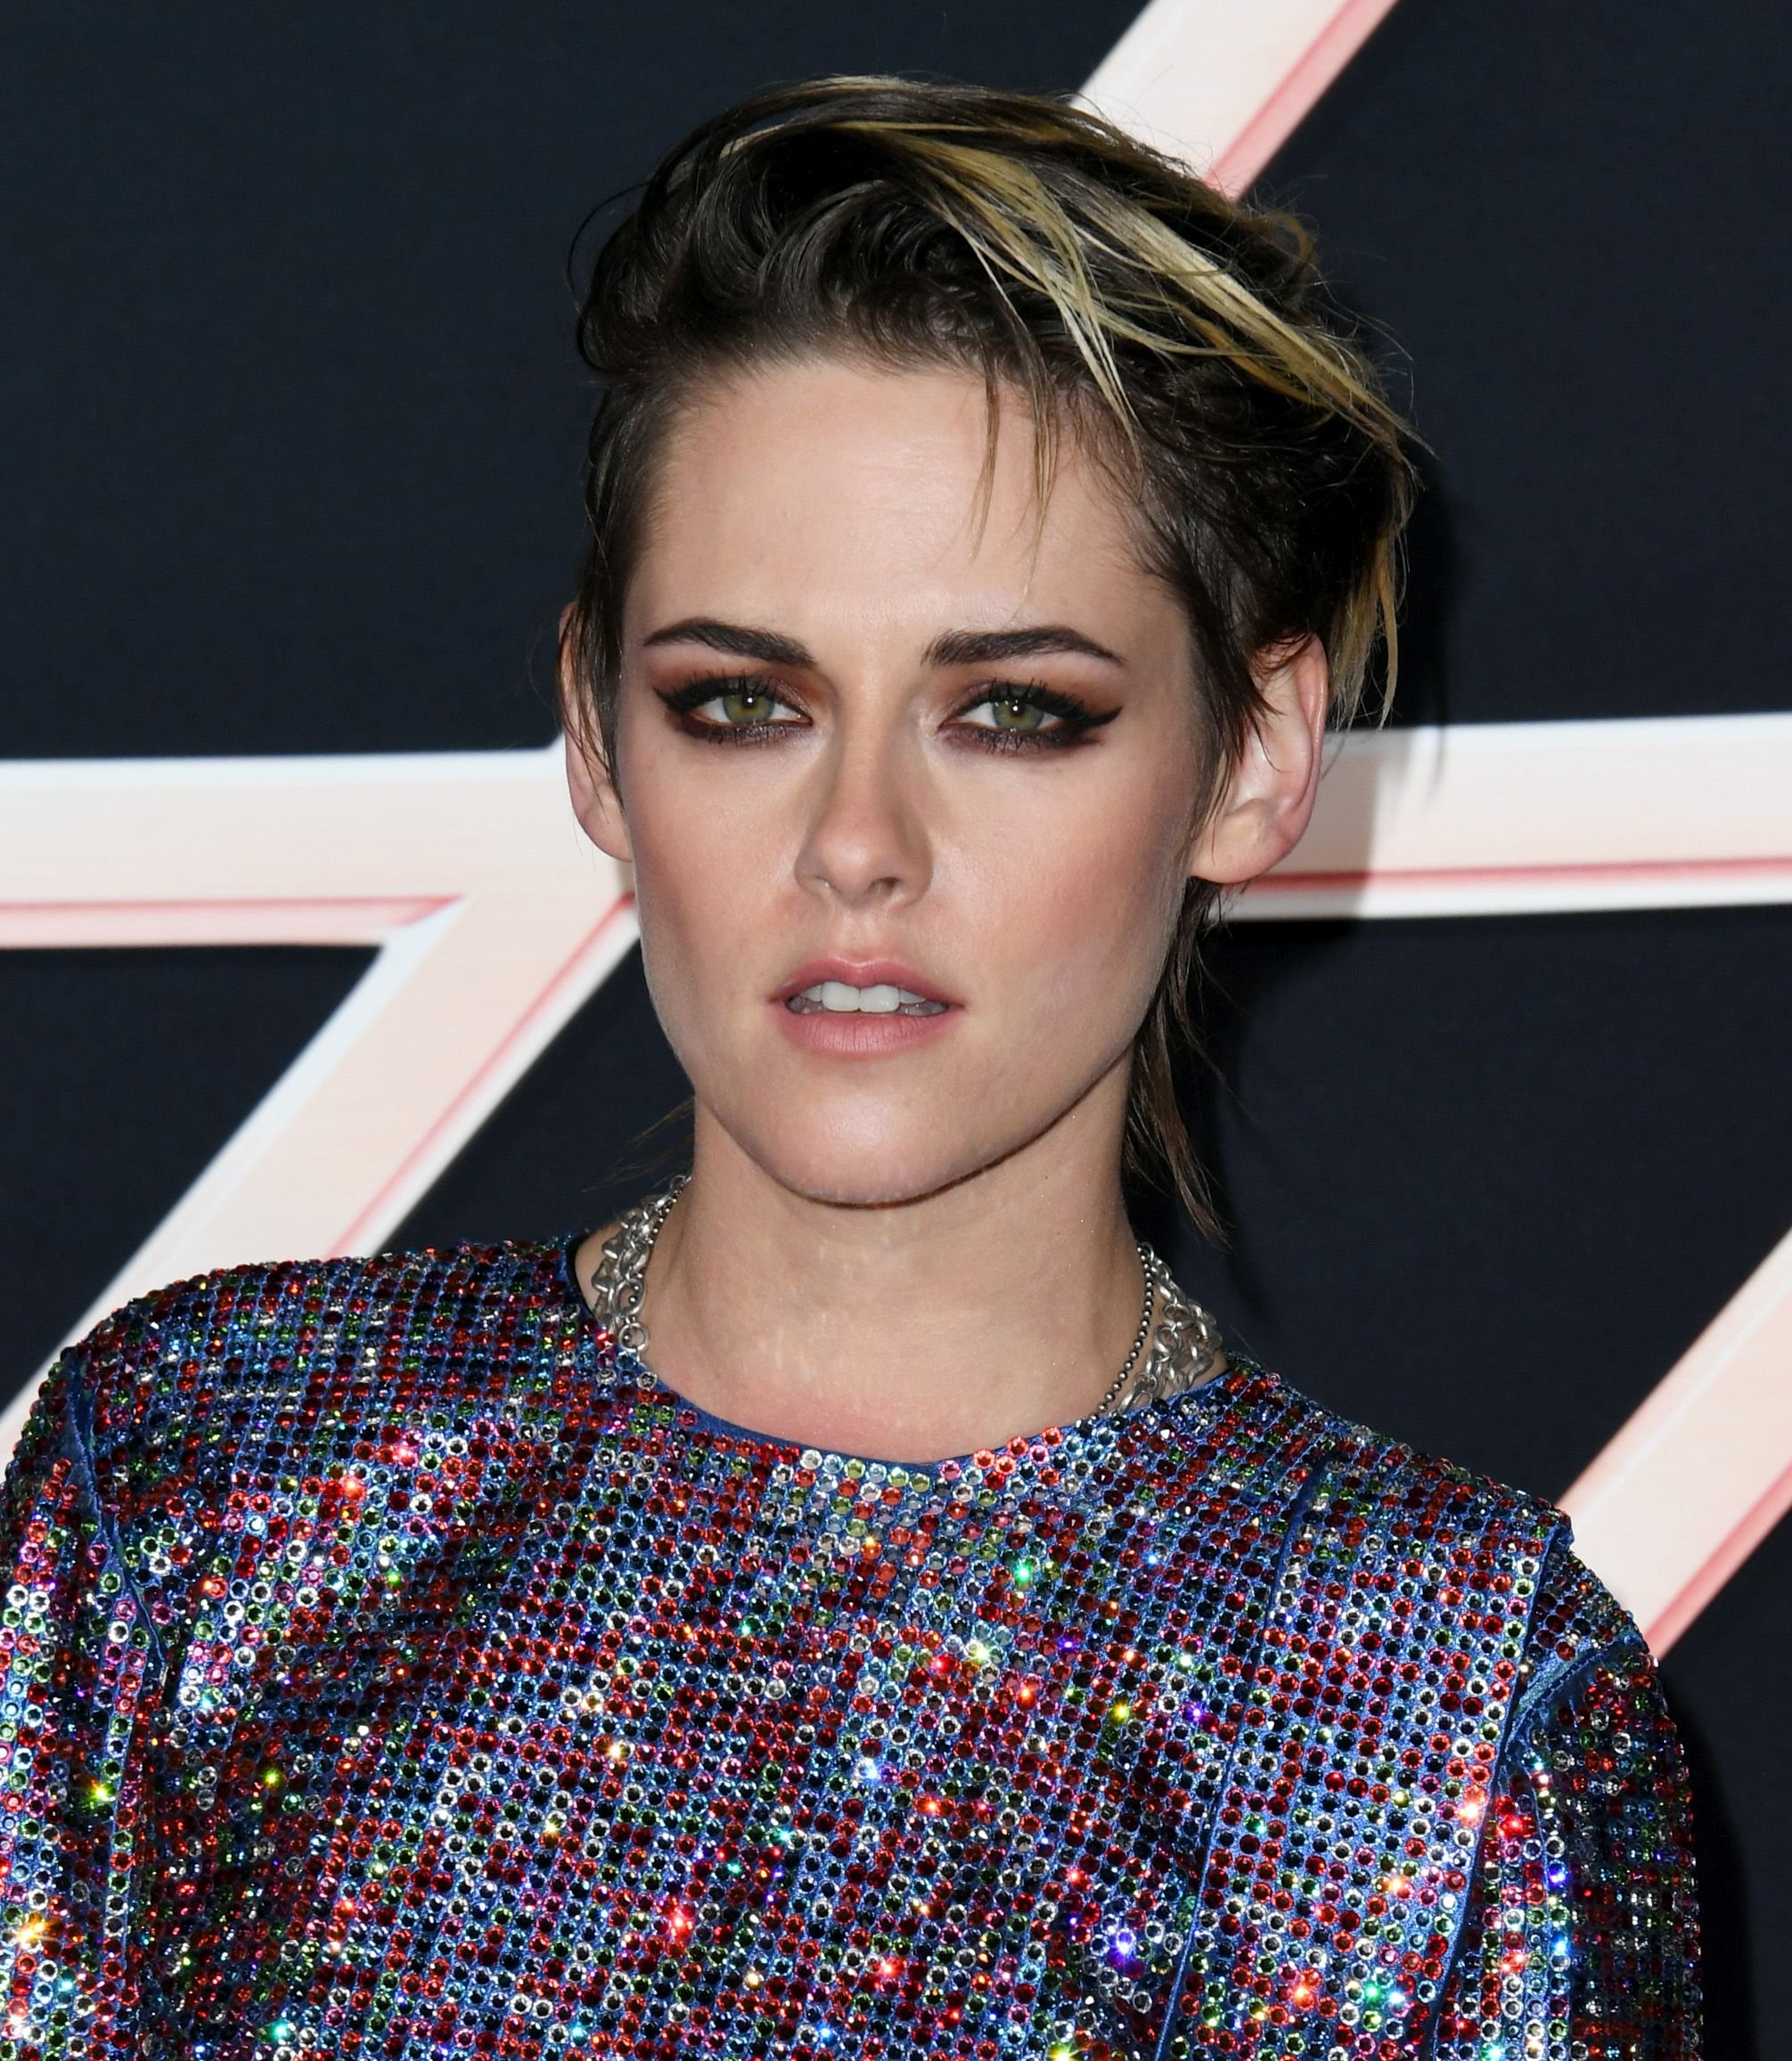 Kristen Stewart at the premiere of Columbia Pictures' "Charlie's Angels" at Westwood Regency Theater on November 11, 2019 in Los Angeles, California. | Photo: Getty Images